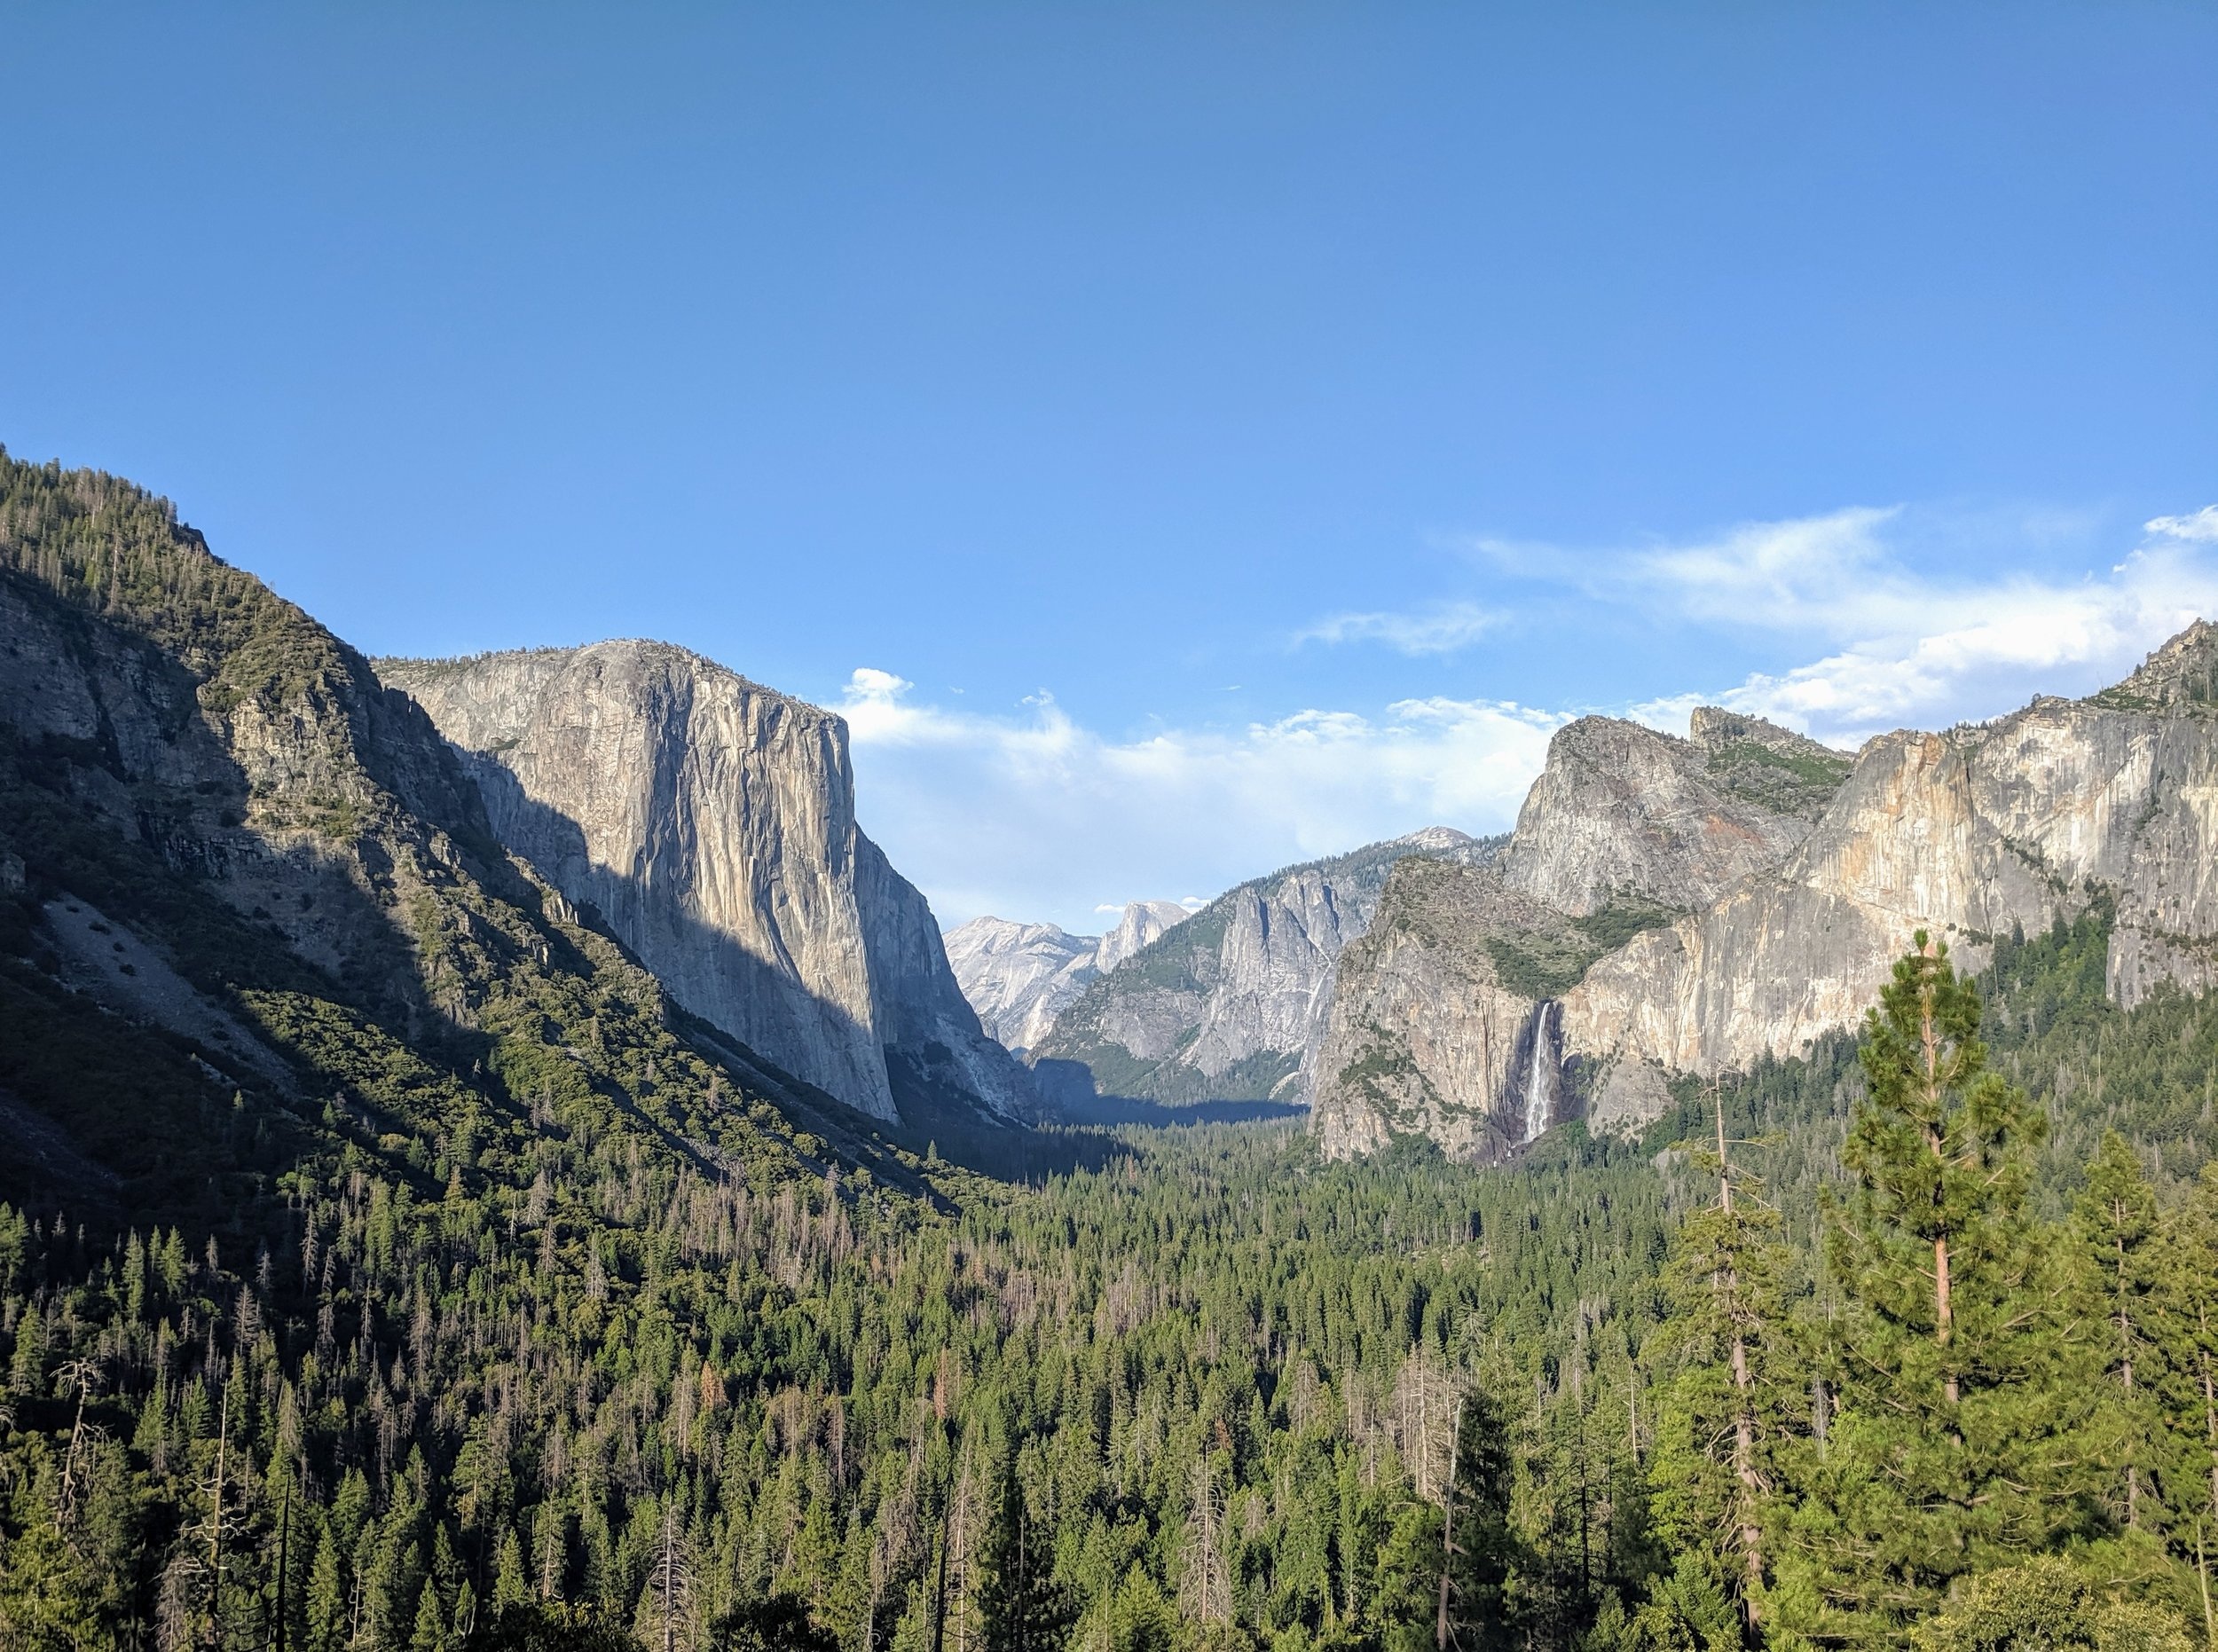  Tunnel View of Yosemite Valley.  El Capitan on the left, Half Dome in far distance, and Bridal Veil Falls on right. 